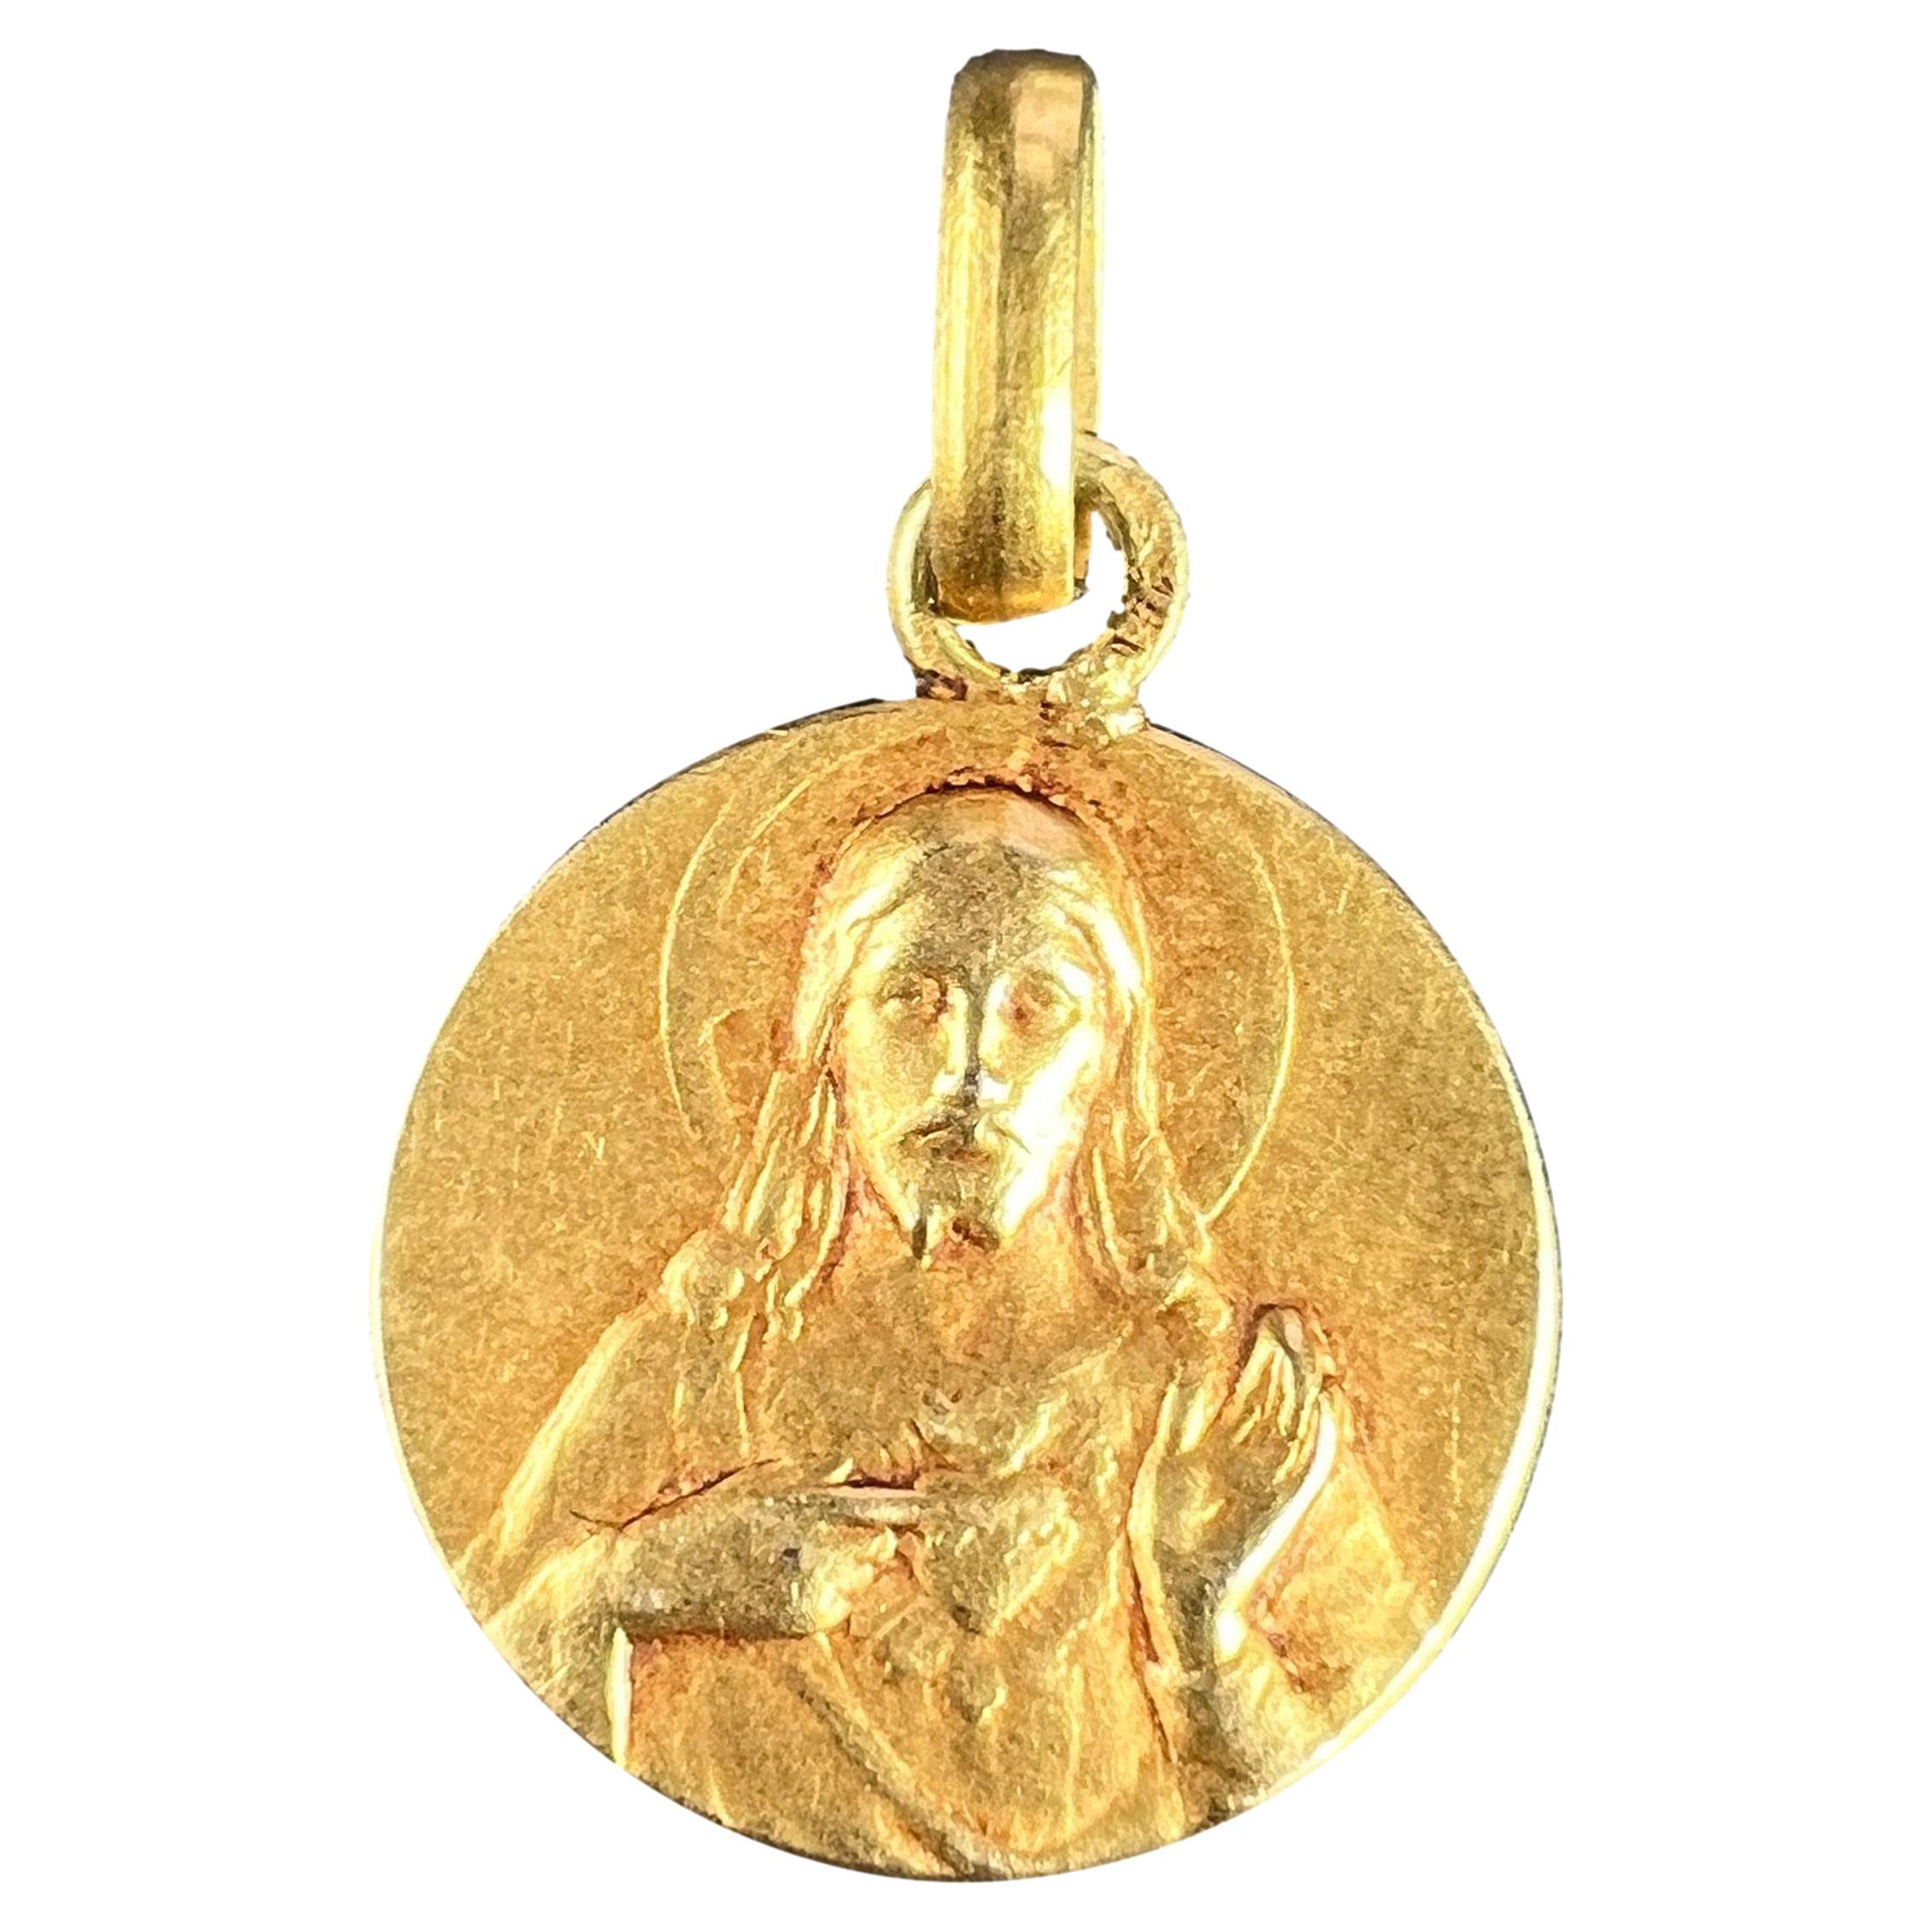 A French 18 karat (18K) yellow gold charm pendant designed as an oval medal depicting the Madonna and Child, signed Vern. The reverse depicts a bunch of roses and lilies and is engraved with the name Gabrielle and the date '17 Septembre 1909'.